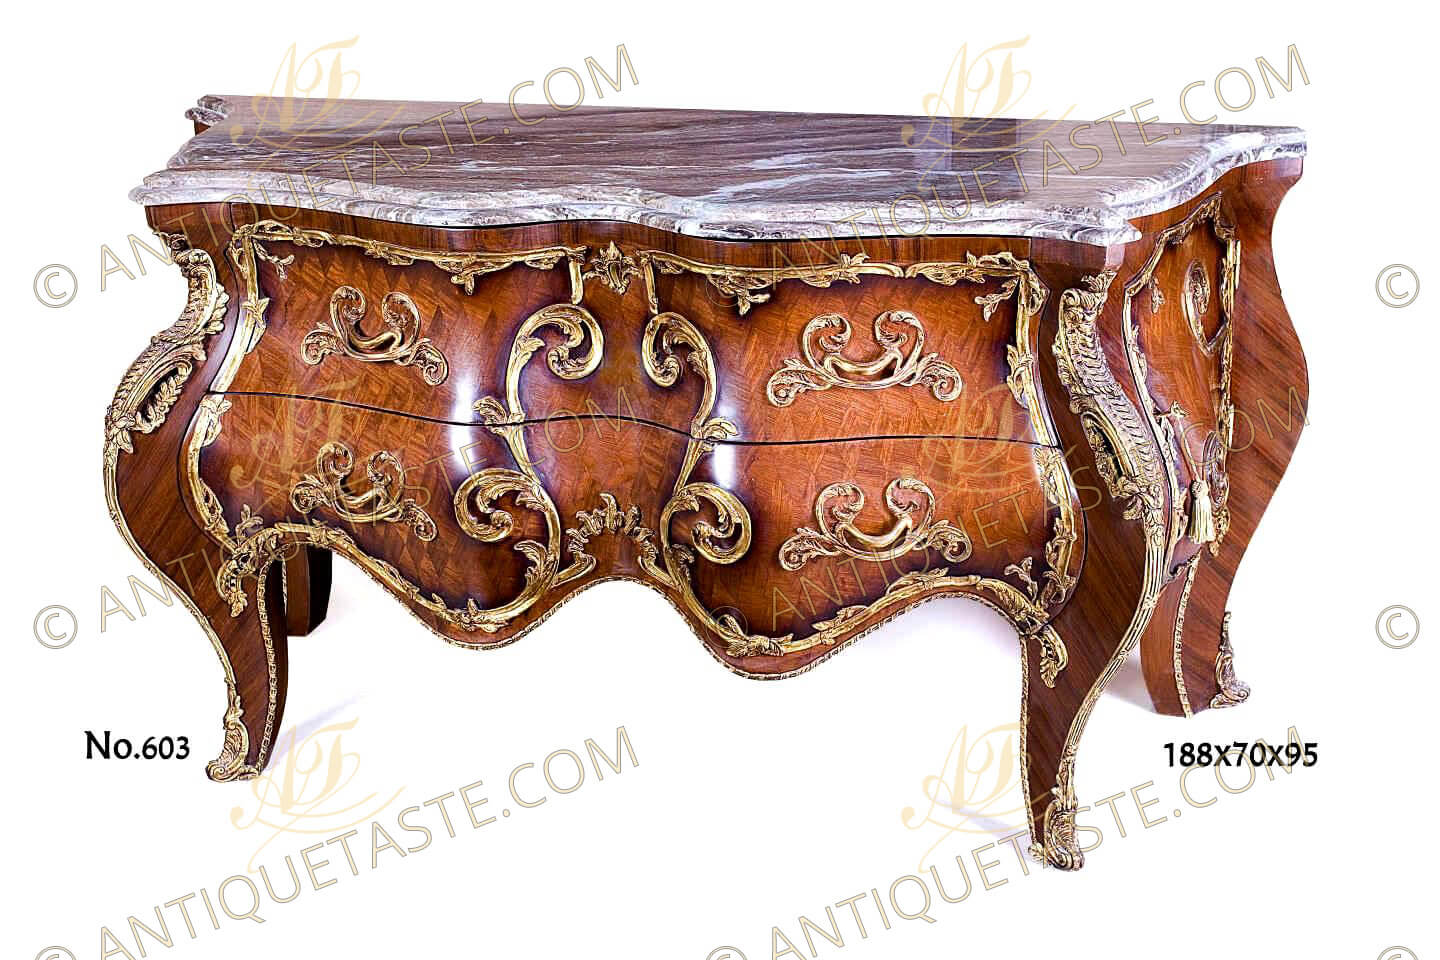 French Louis XV style bombé arbalest shaped ormolu-mounted veneer and parquetry inlaid grand Cabinet